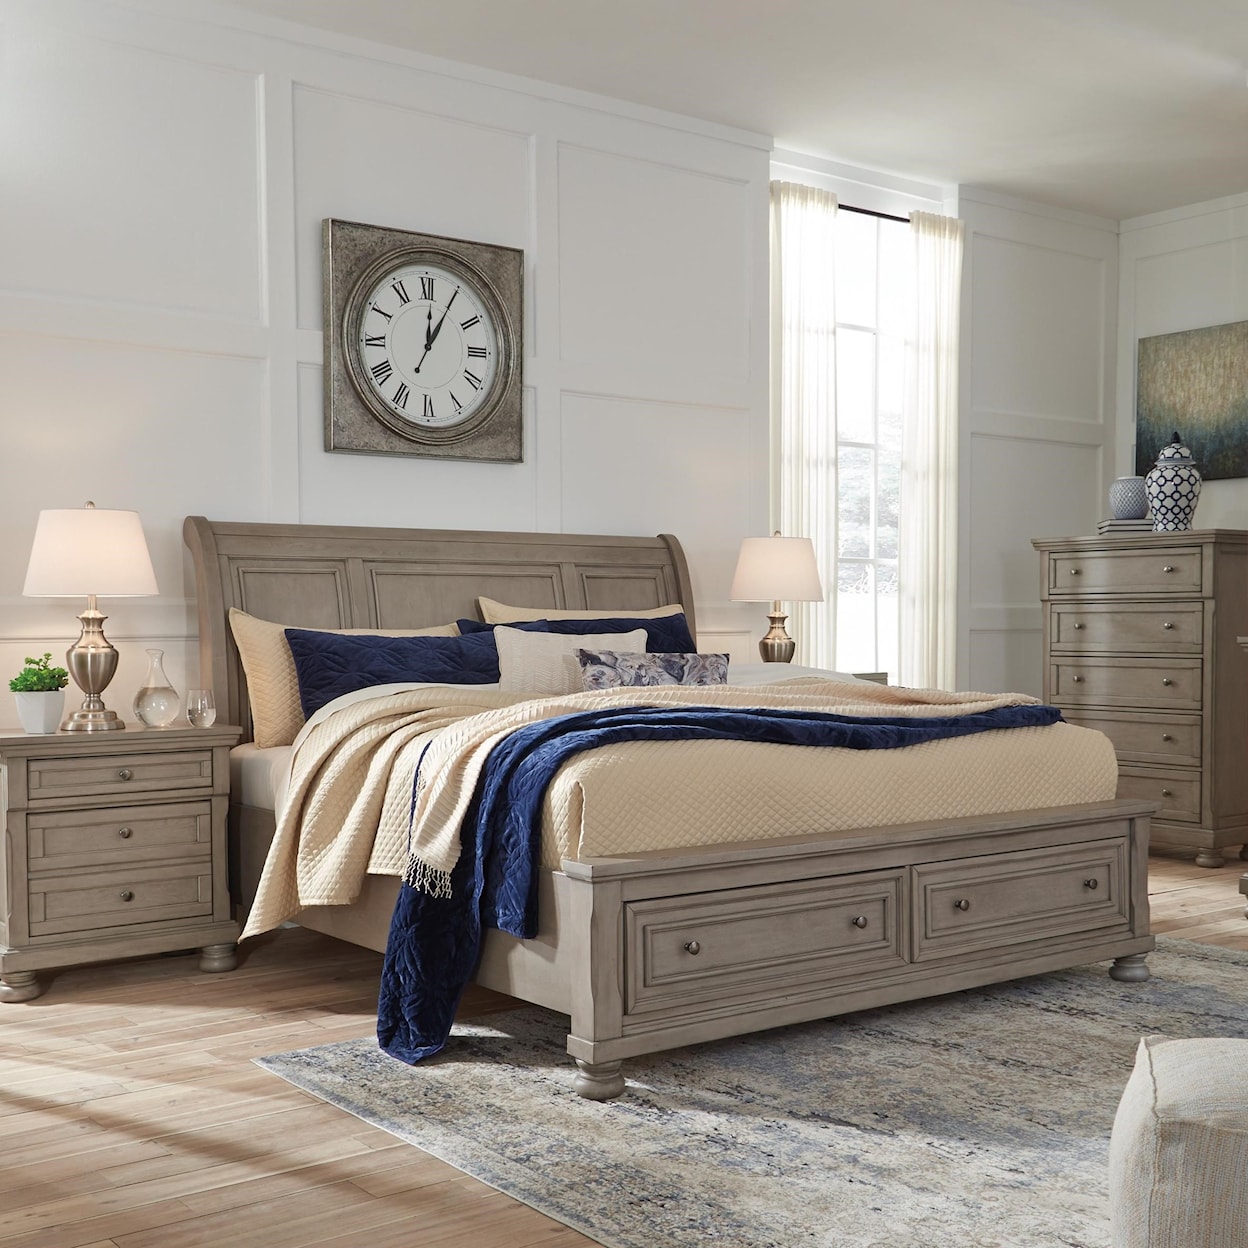 Signature Design by Ashley Lettner King Sleigh Bed